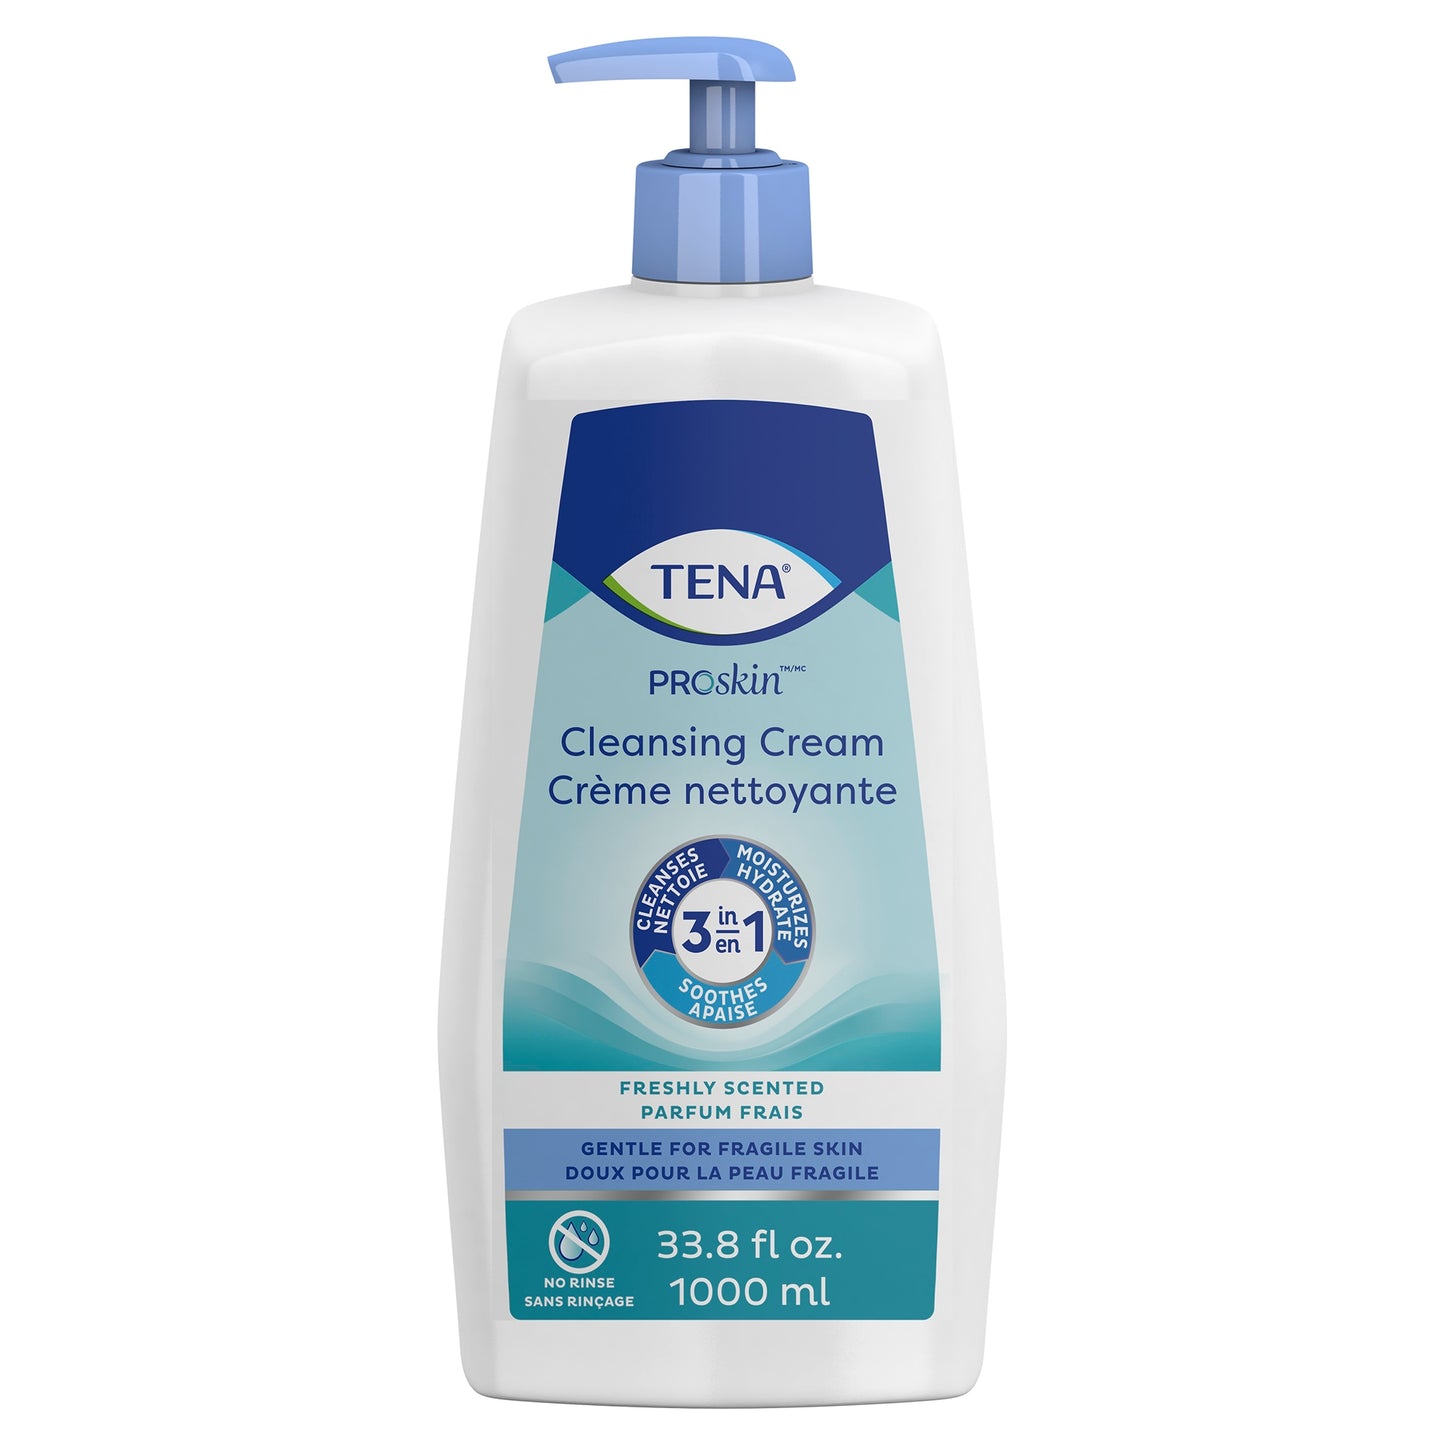 Tena Body Wash Cleansing Cream, Alcohol-Free, 3-in-1 Formula, Scented, 1,000 mL Pump Bottle - 64435